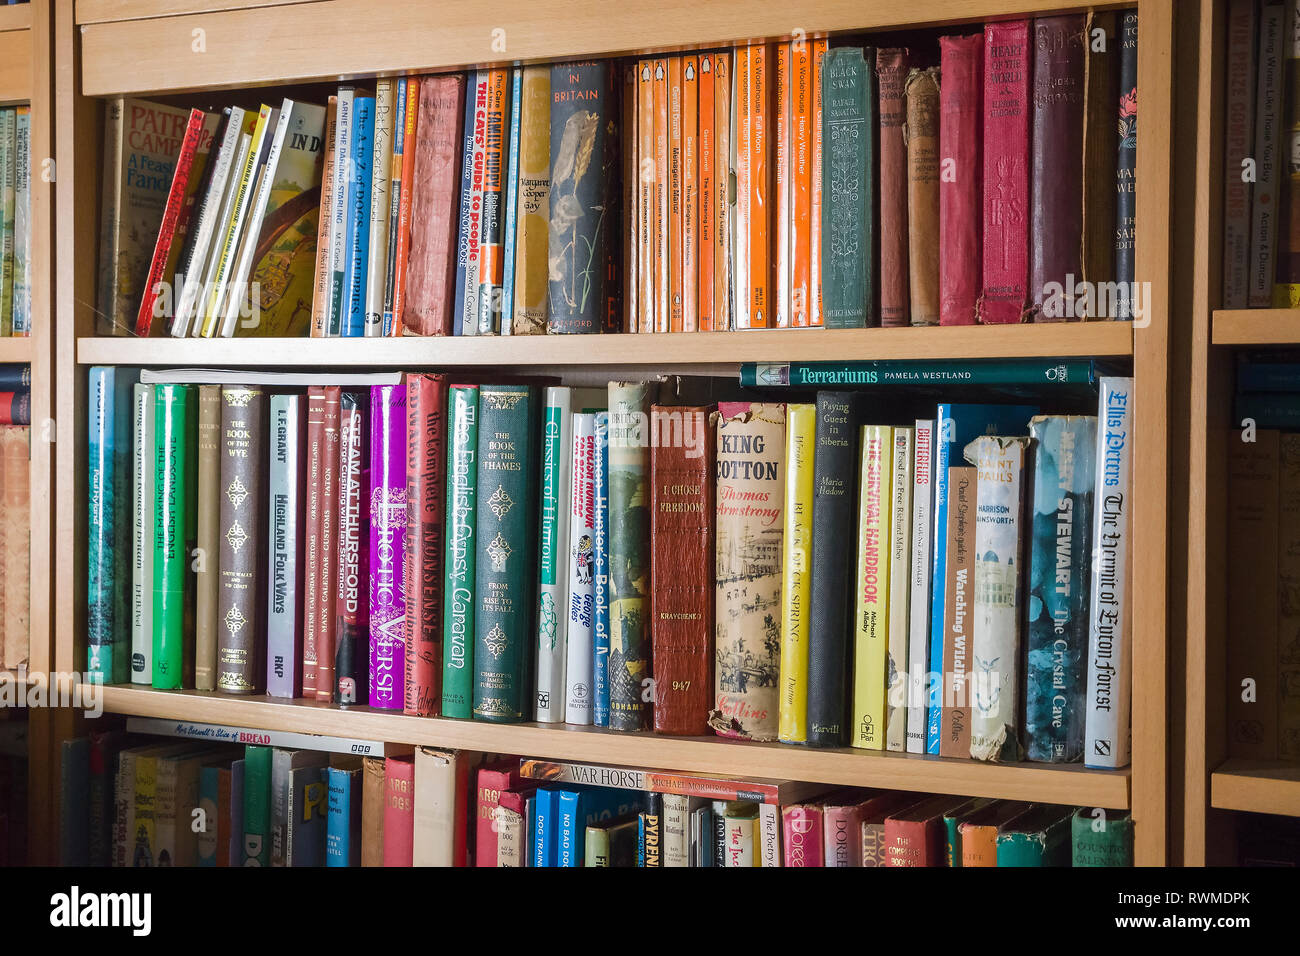 Open-fronted bookcase filled with a mixture of old hardback and soft-back books, both fiction and non-fiction genres Stock Photo